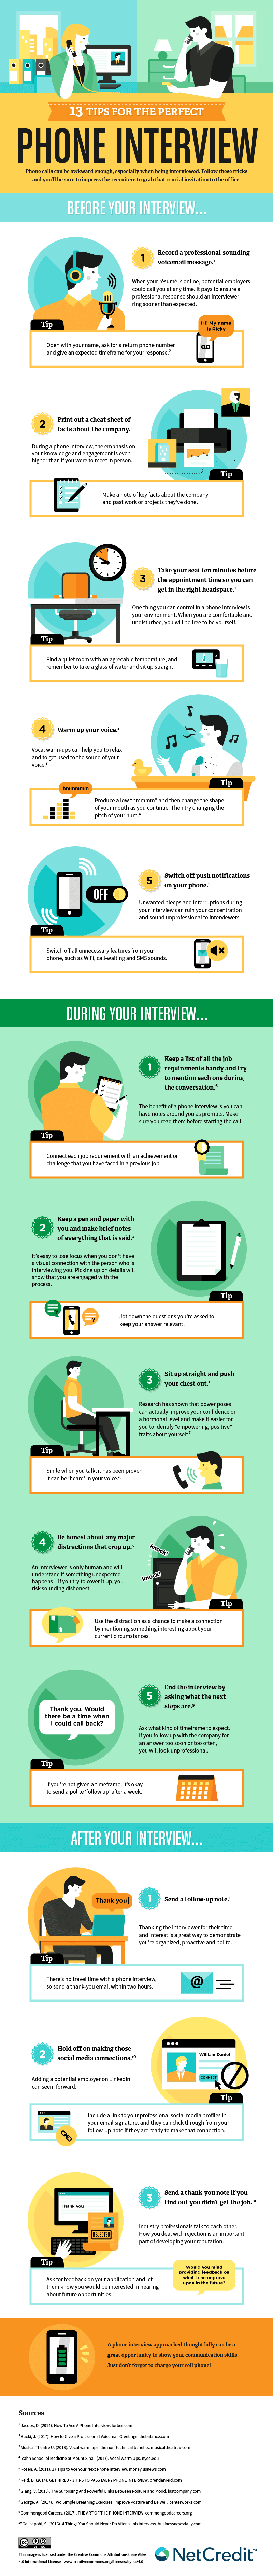 Phone interview infographic